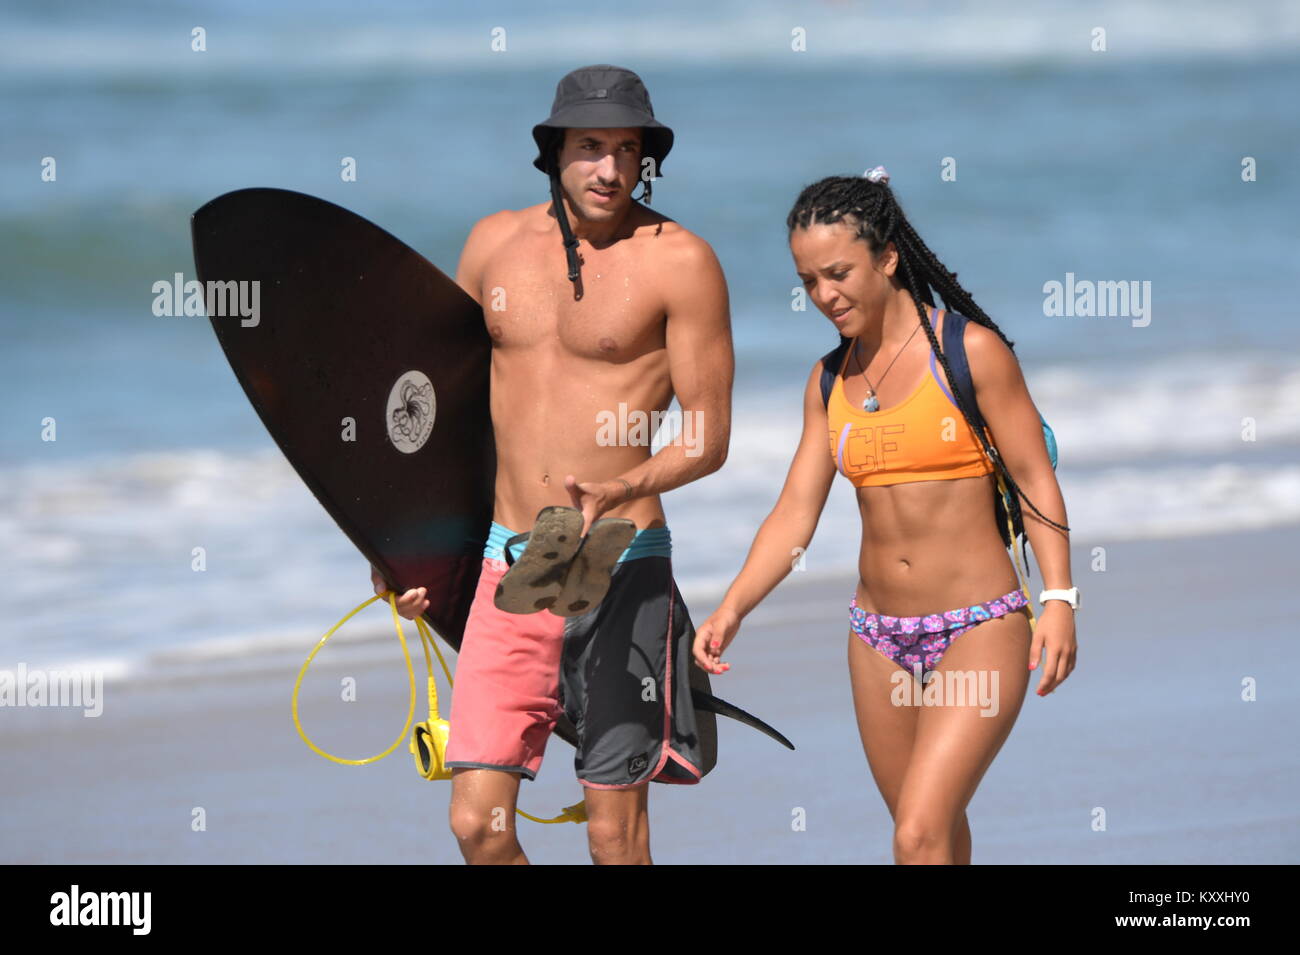 man and woman chat on beautiful beach after surfing Costa Rica lifestyle Stock Photo